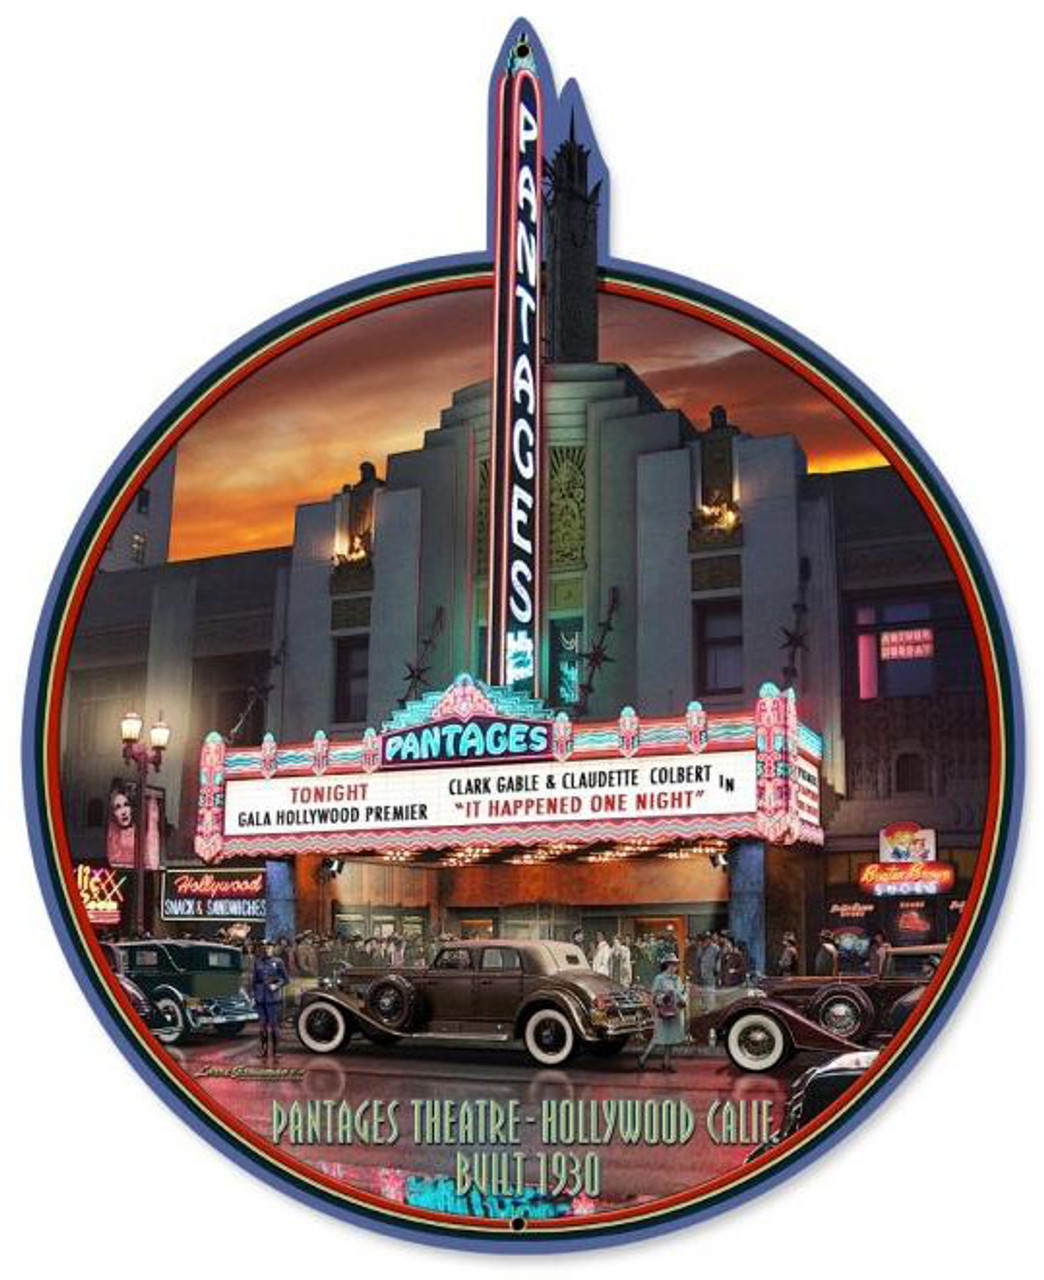 Pantages Theatre Custom Metal Shape Sign 22 x 27 Inches